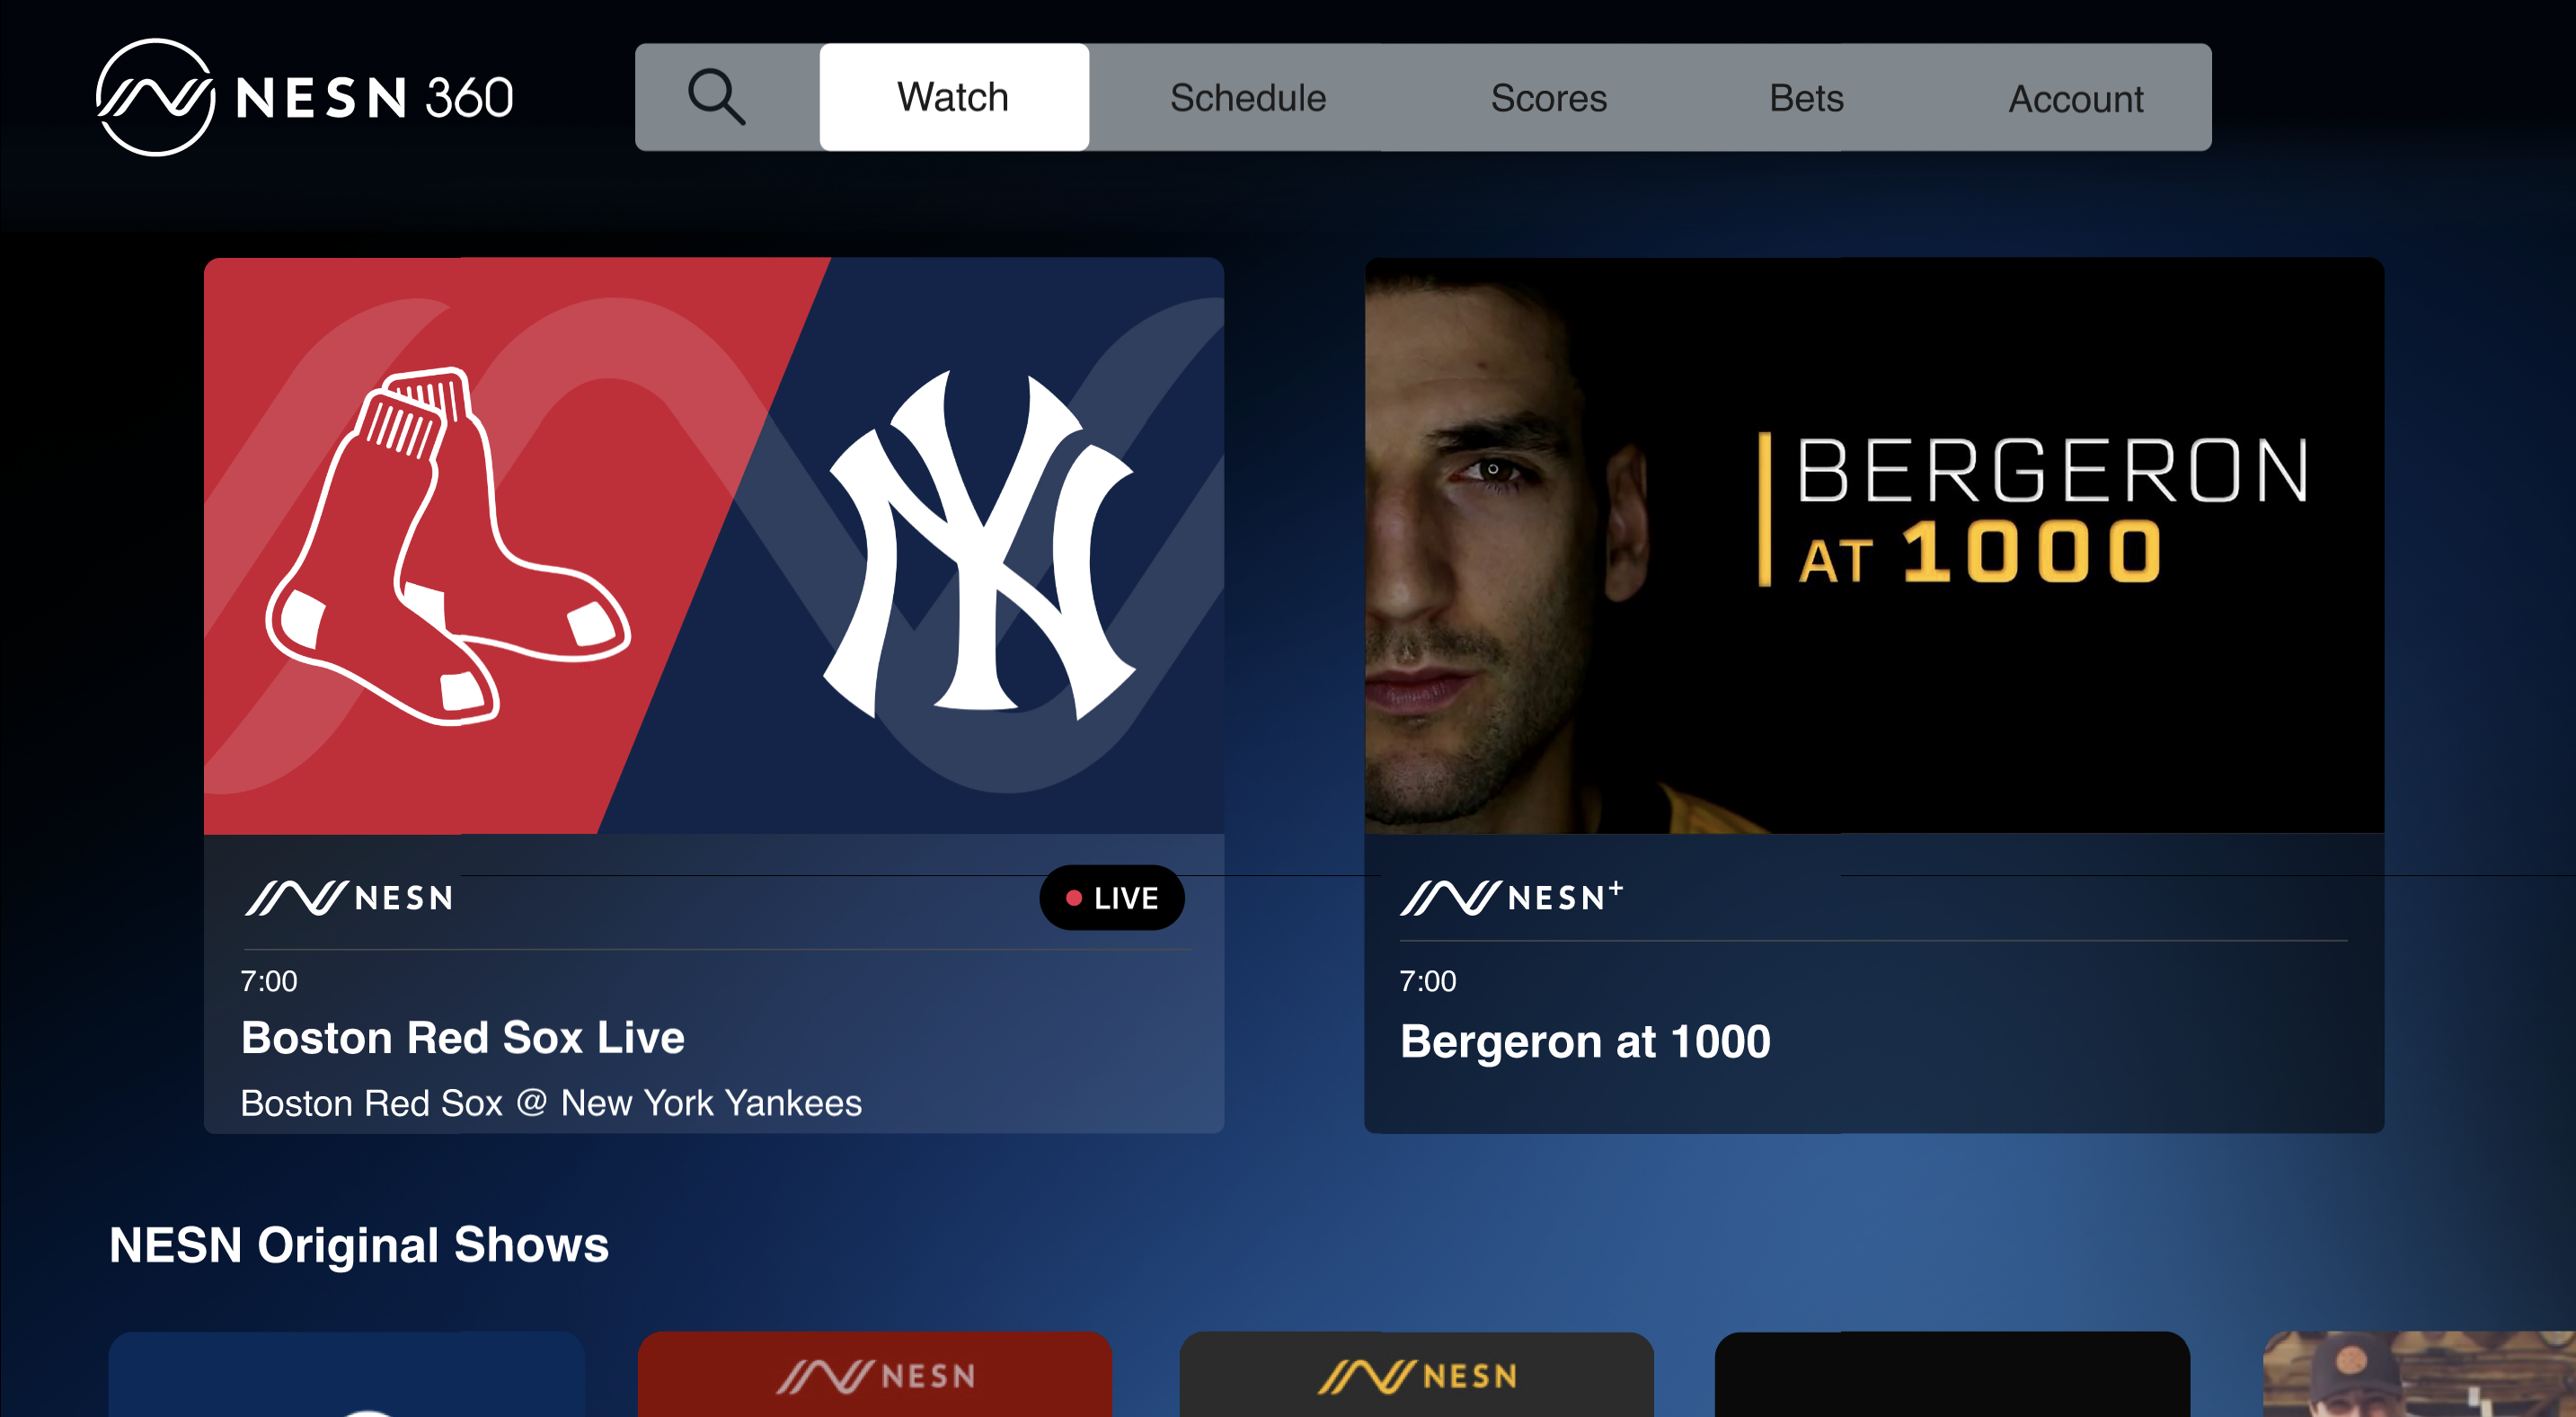 NESN Becomes First RSN To Launch DTC Streaming Service With NESN 360